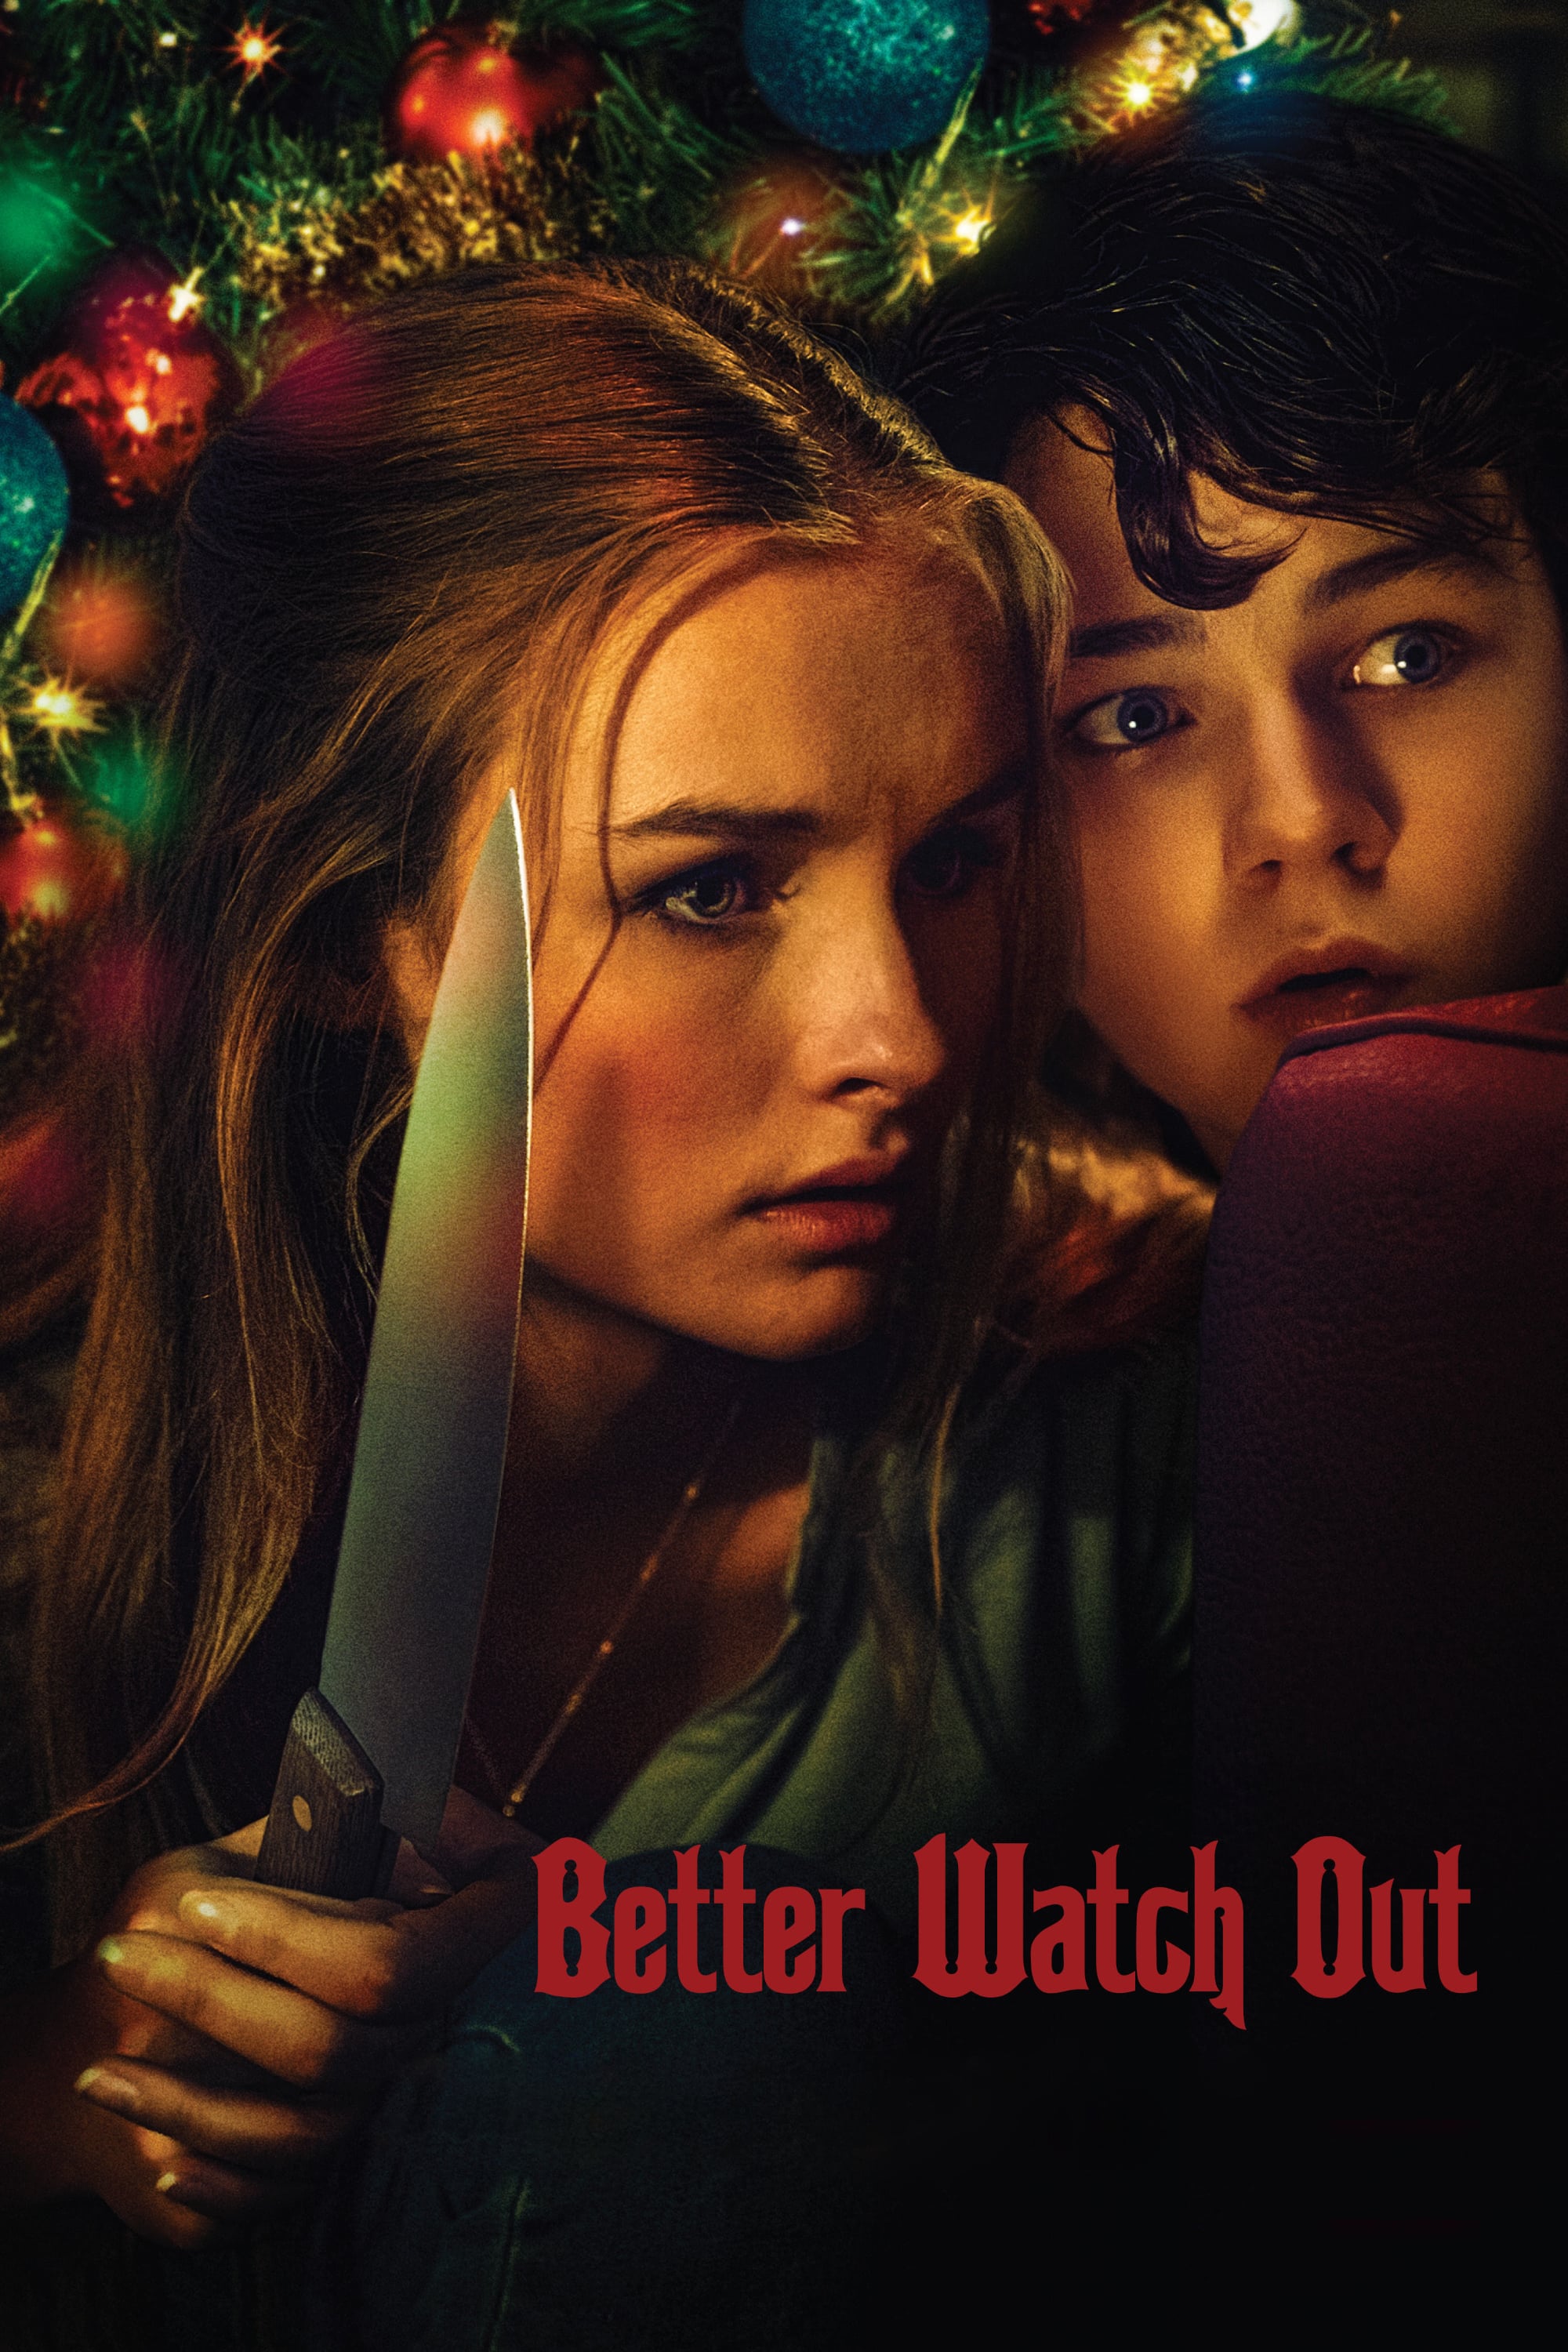 Poster for the movie "Better Watch Out"